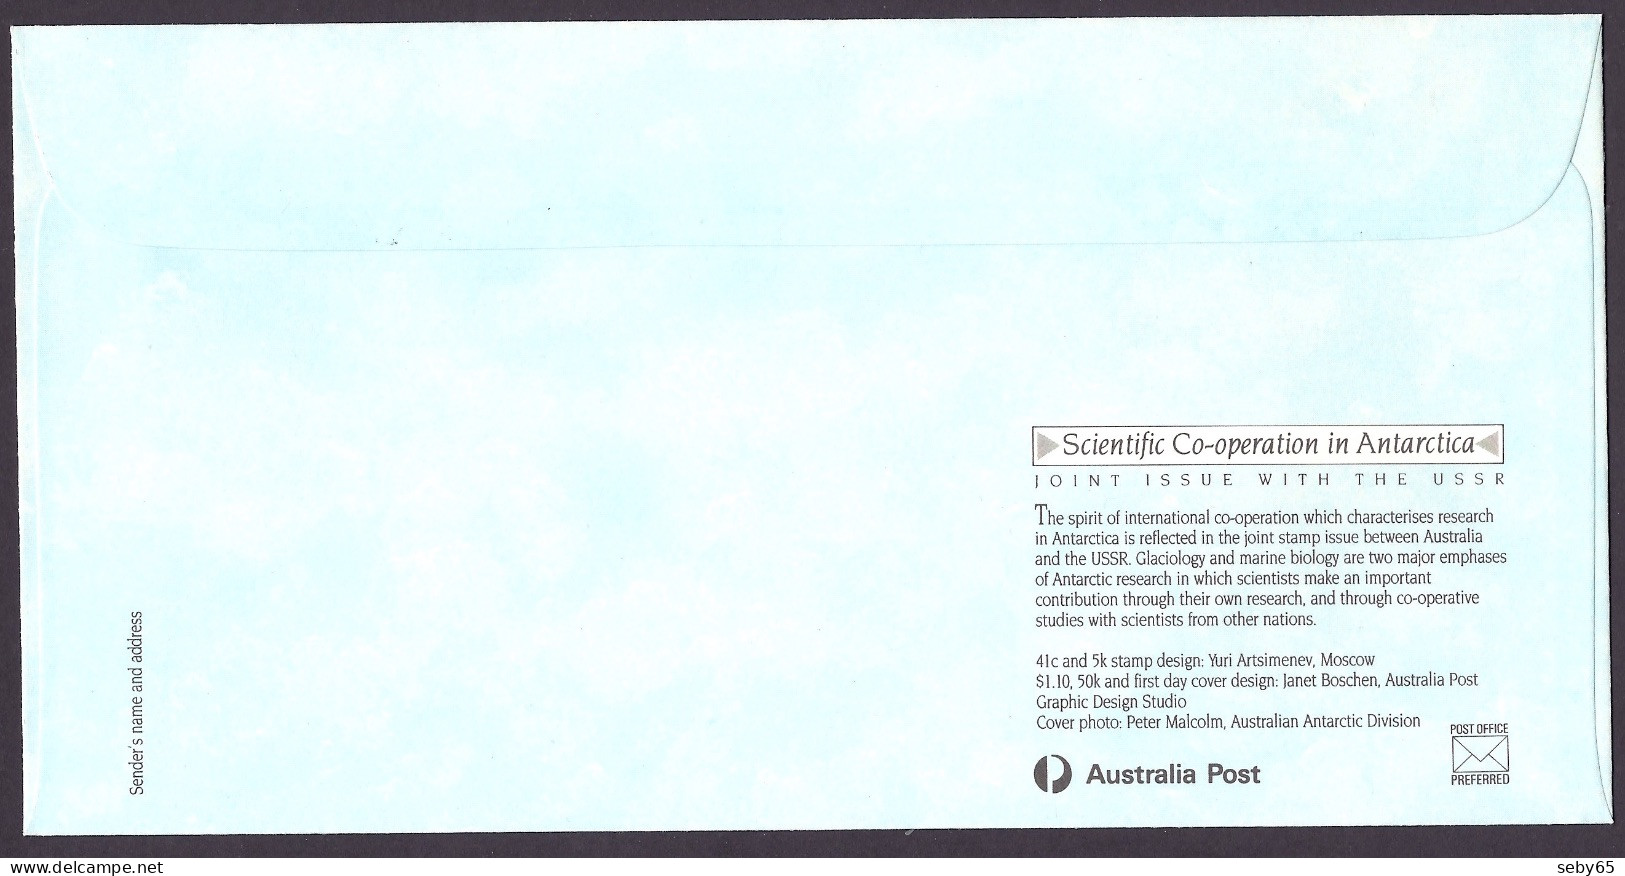 Australia 1990 - Antarctica, USSR Joint Issue, Scientific Co-operation, Glaciers, South Pole, Antarctic, Russia - FDC - Ersttagsbelege (FDC)